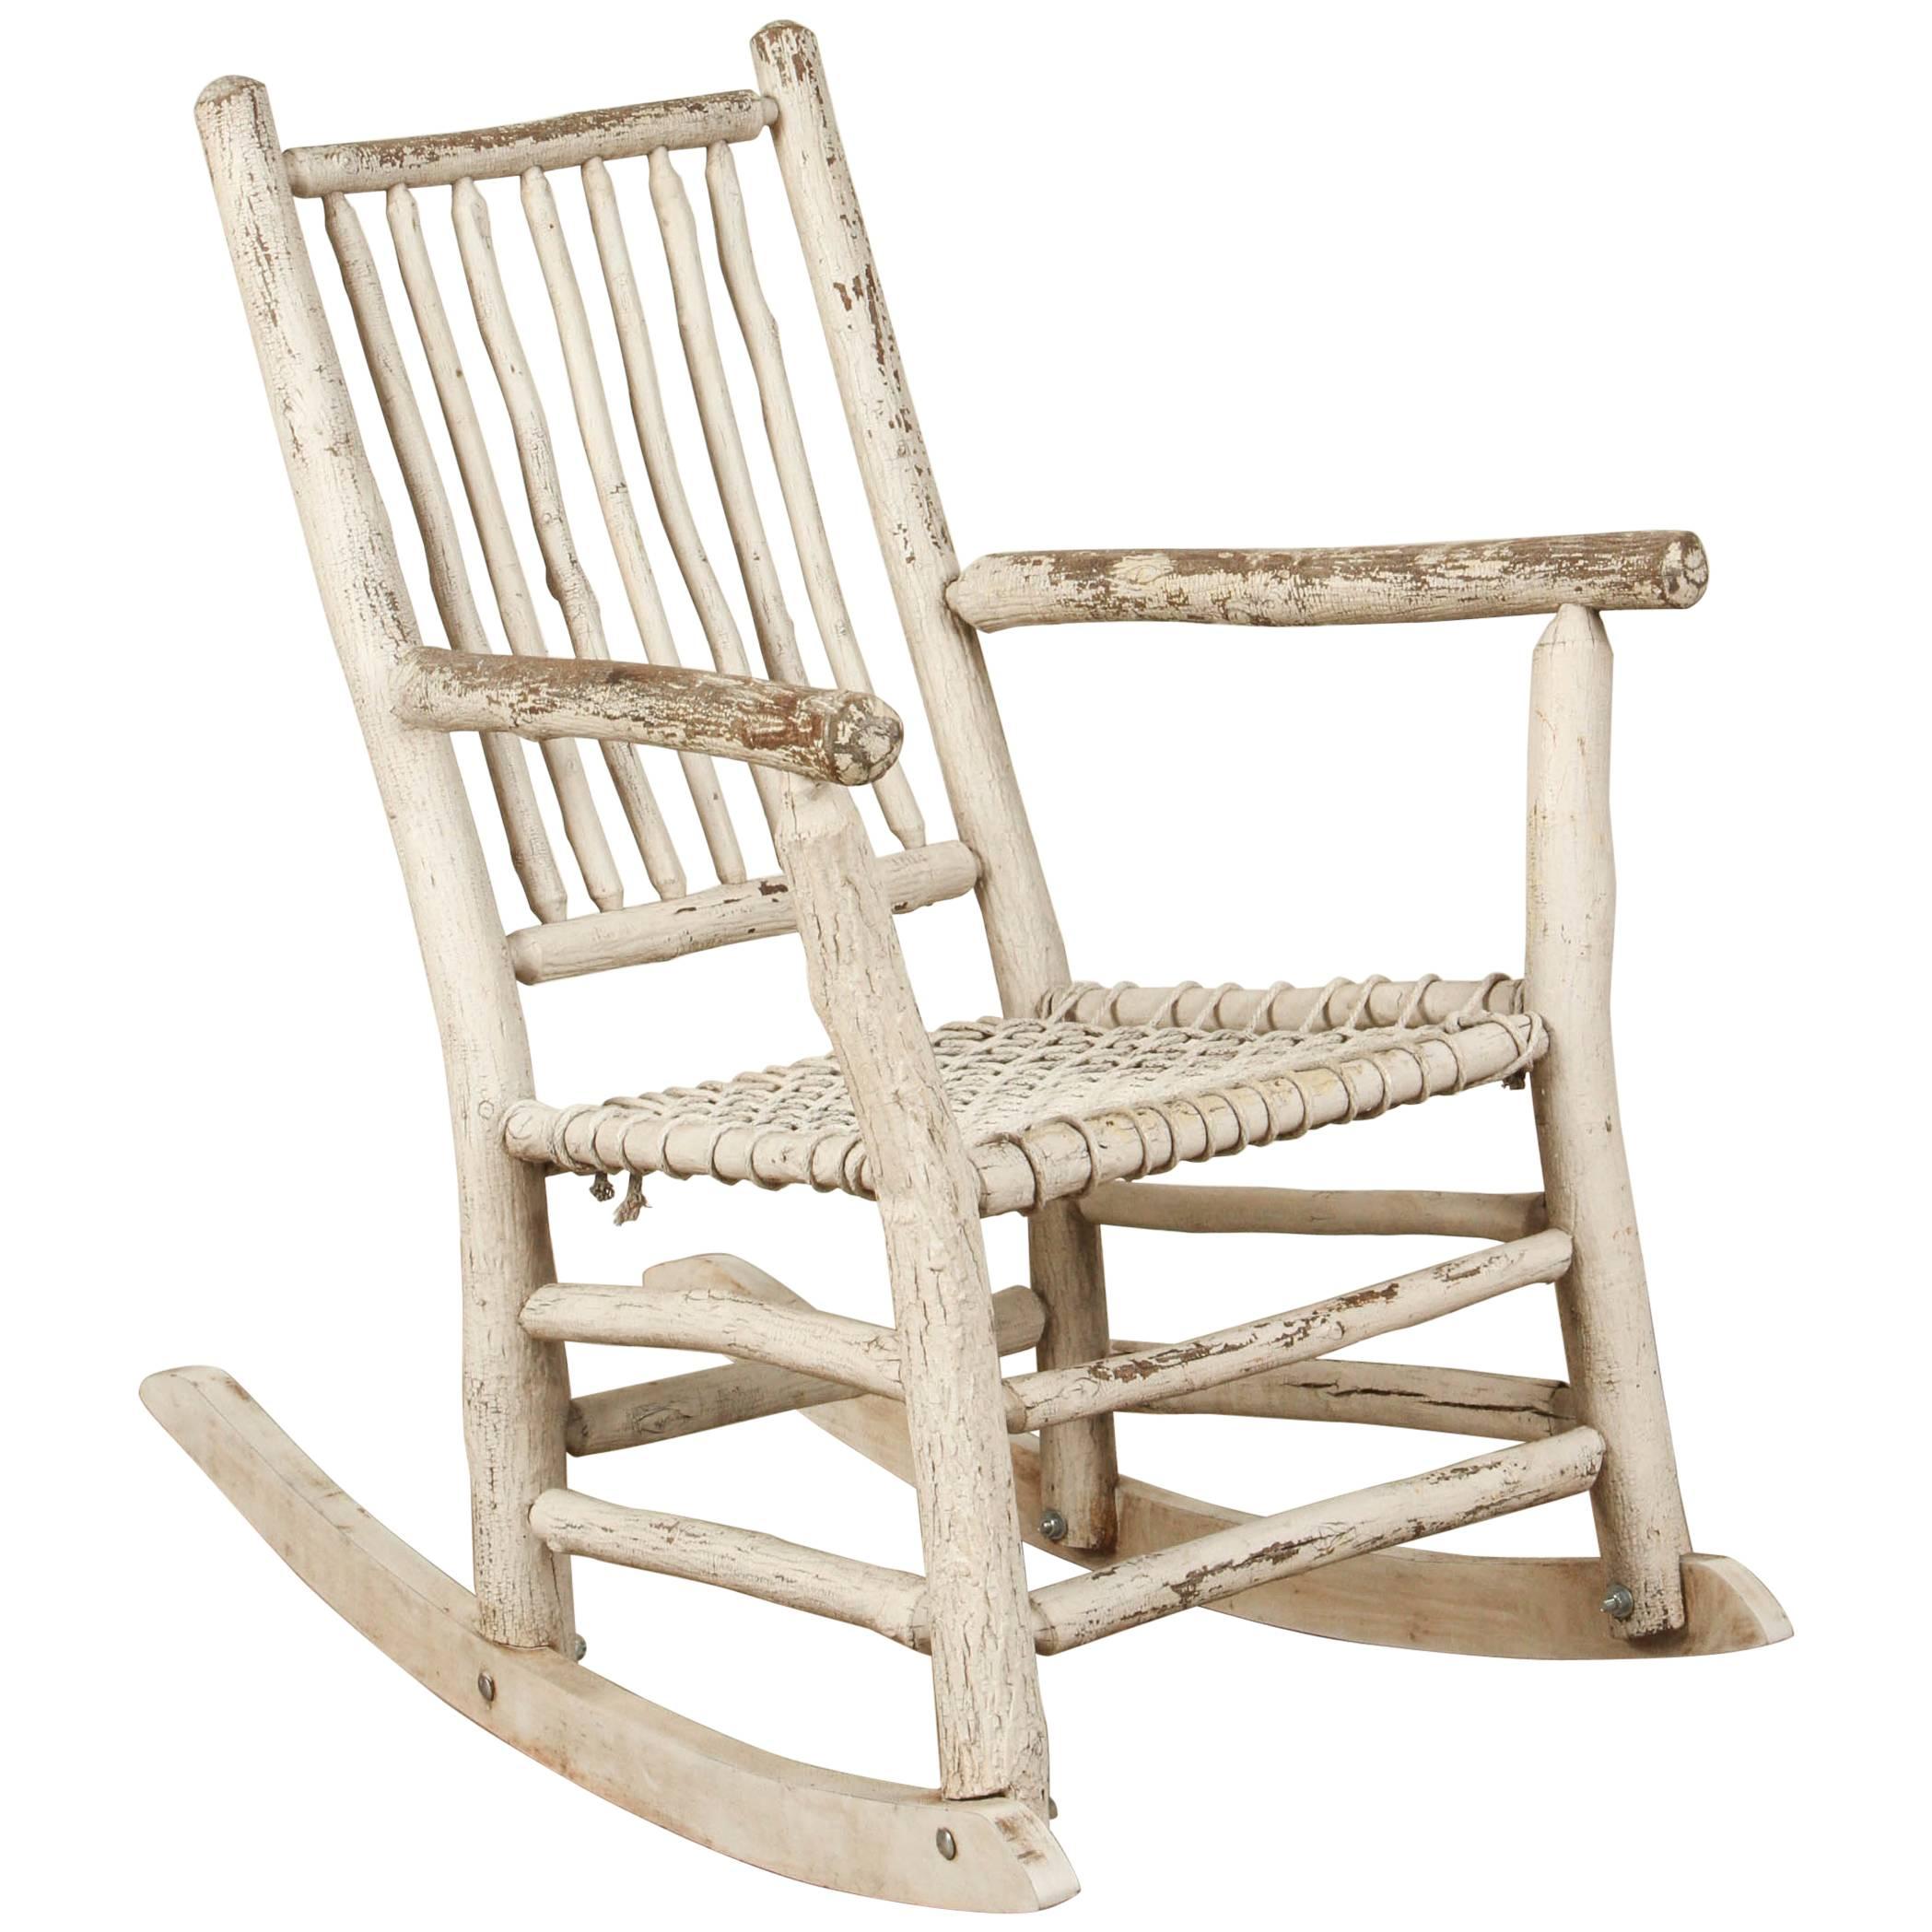 White Painted Rustic Rocking Chair